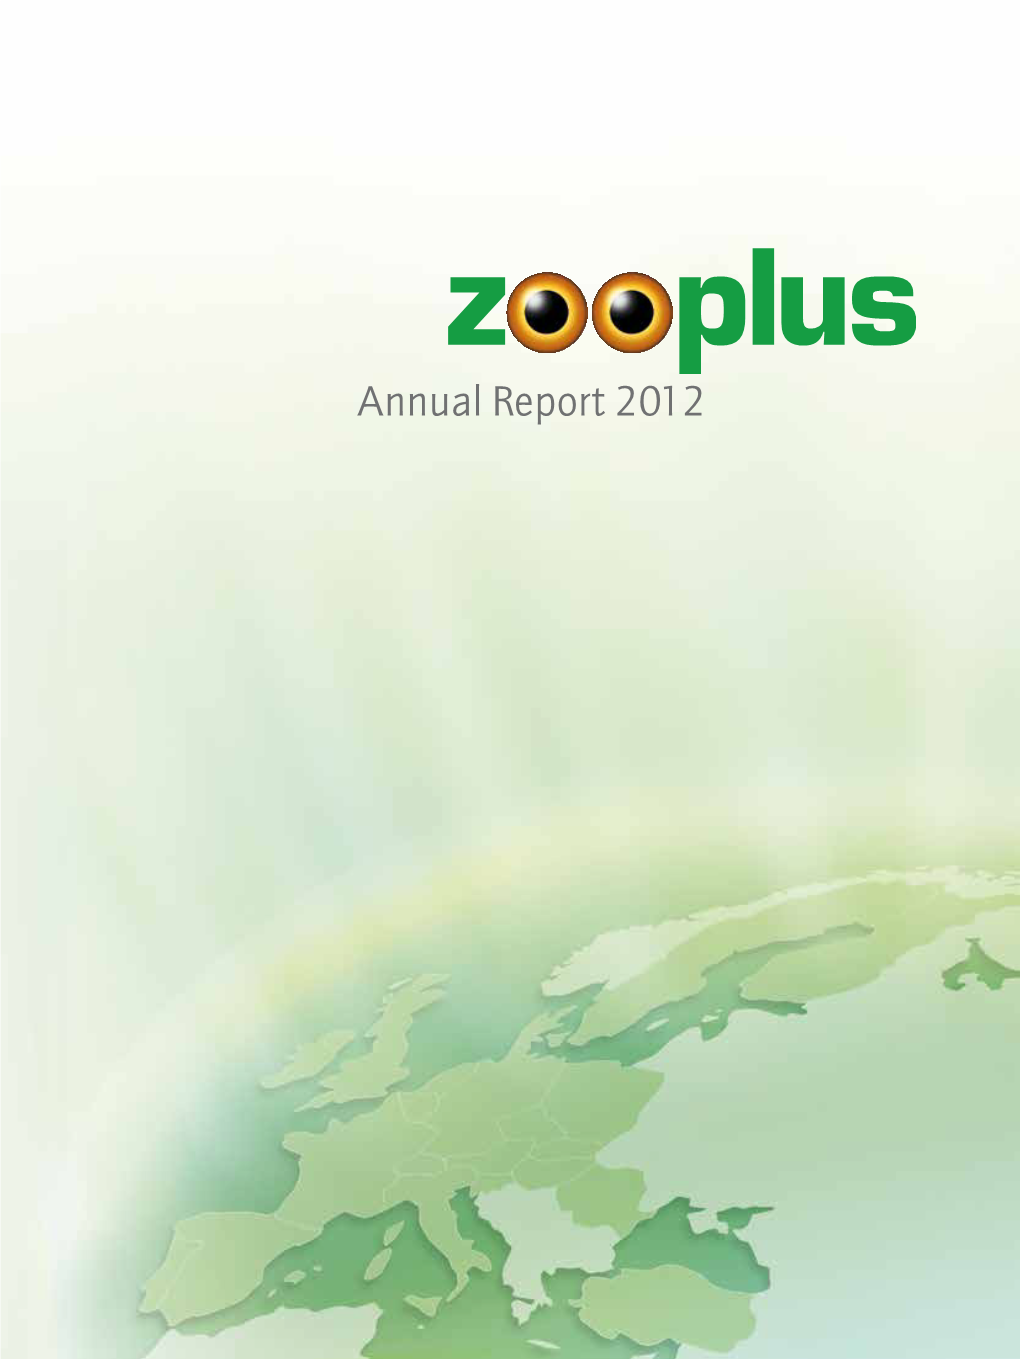 Annual Report 2012 Key Figures